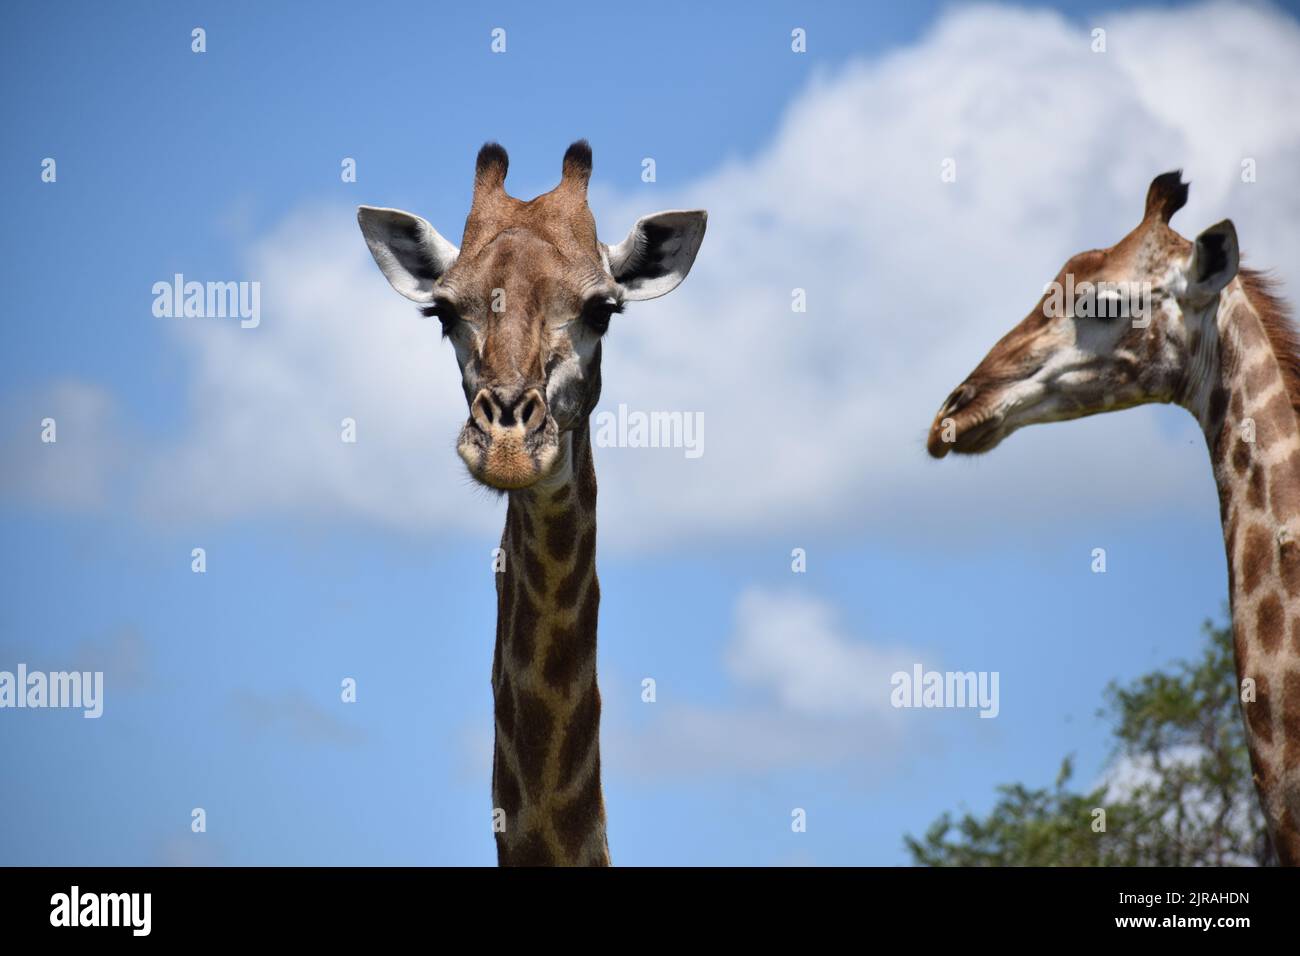 Image of two giraffe, one frontal and one side profile view, presenting two very different looking faces. Stock Photo